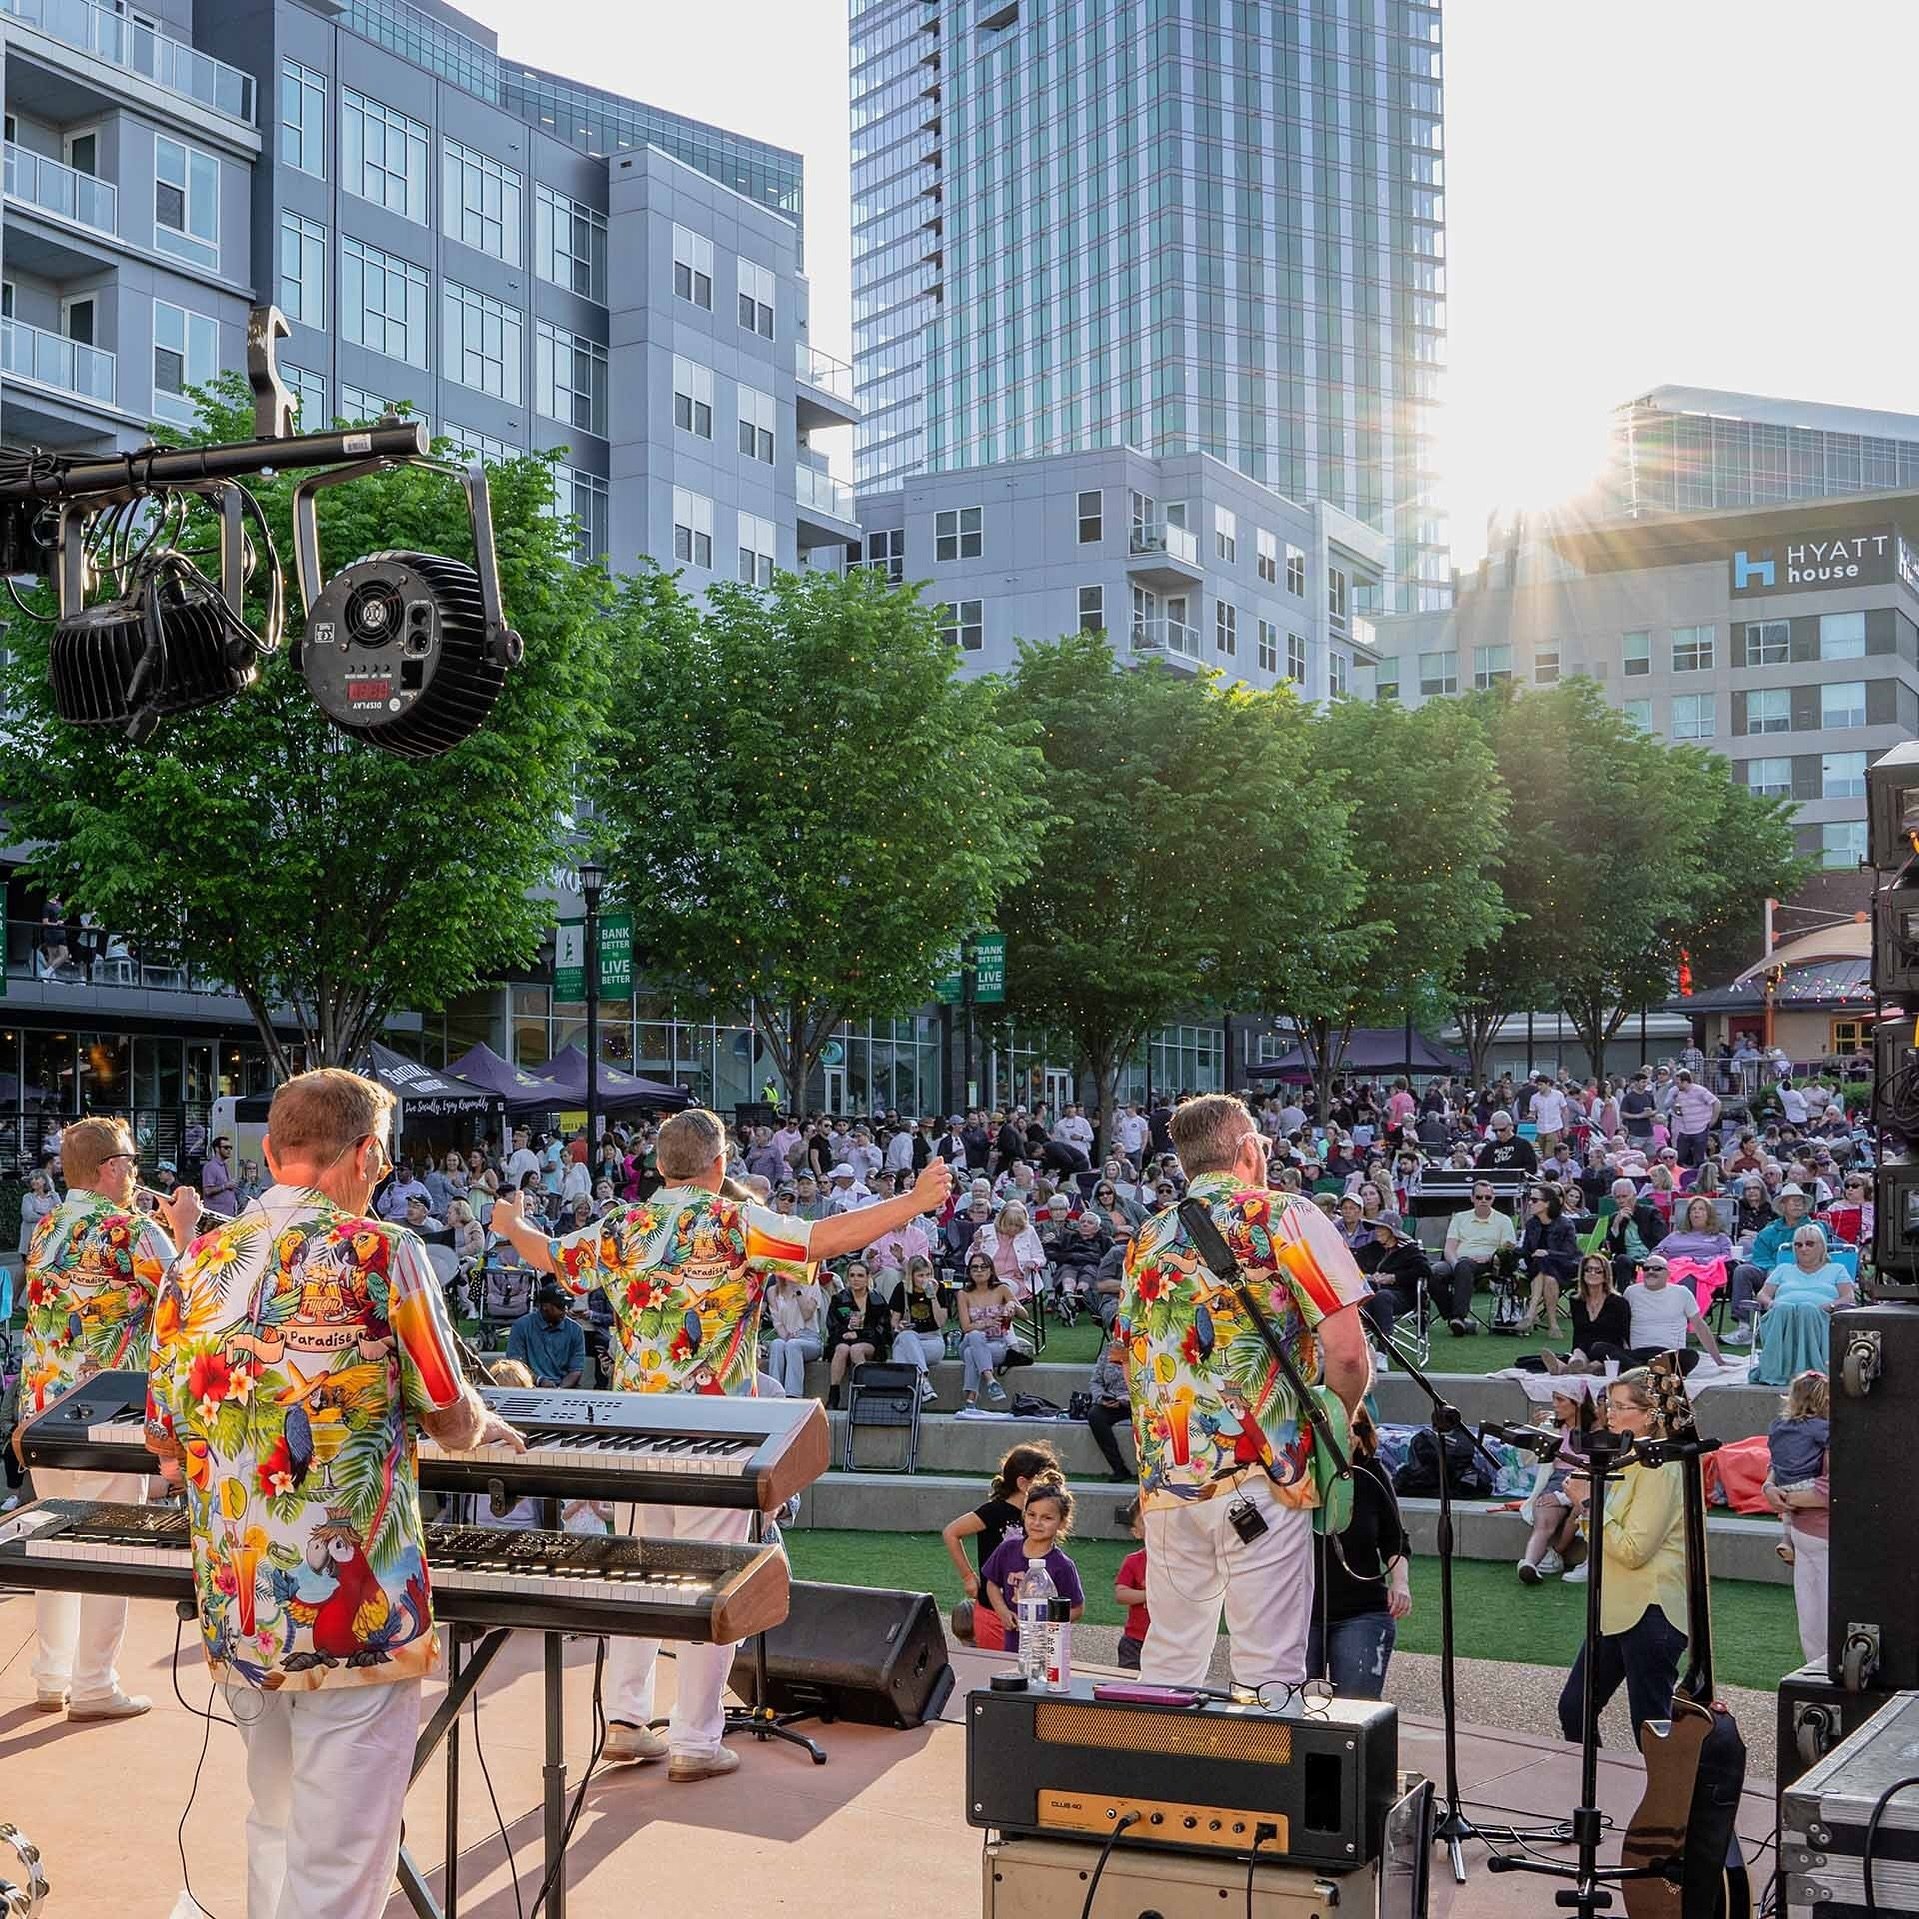 IT&rsquo;S BACK!! 🎶

We&rsquo;ve been waiting for this since last year...The Music fest is back starting April 11th!

1️⃣Get your tickets
2️⃣Grab food and a drink at @level7rooftopbar 
3️⃣Head down to enjoy live music in the park!
4️⃣Then head back 